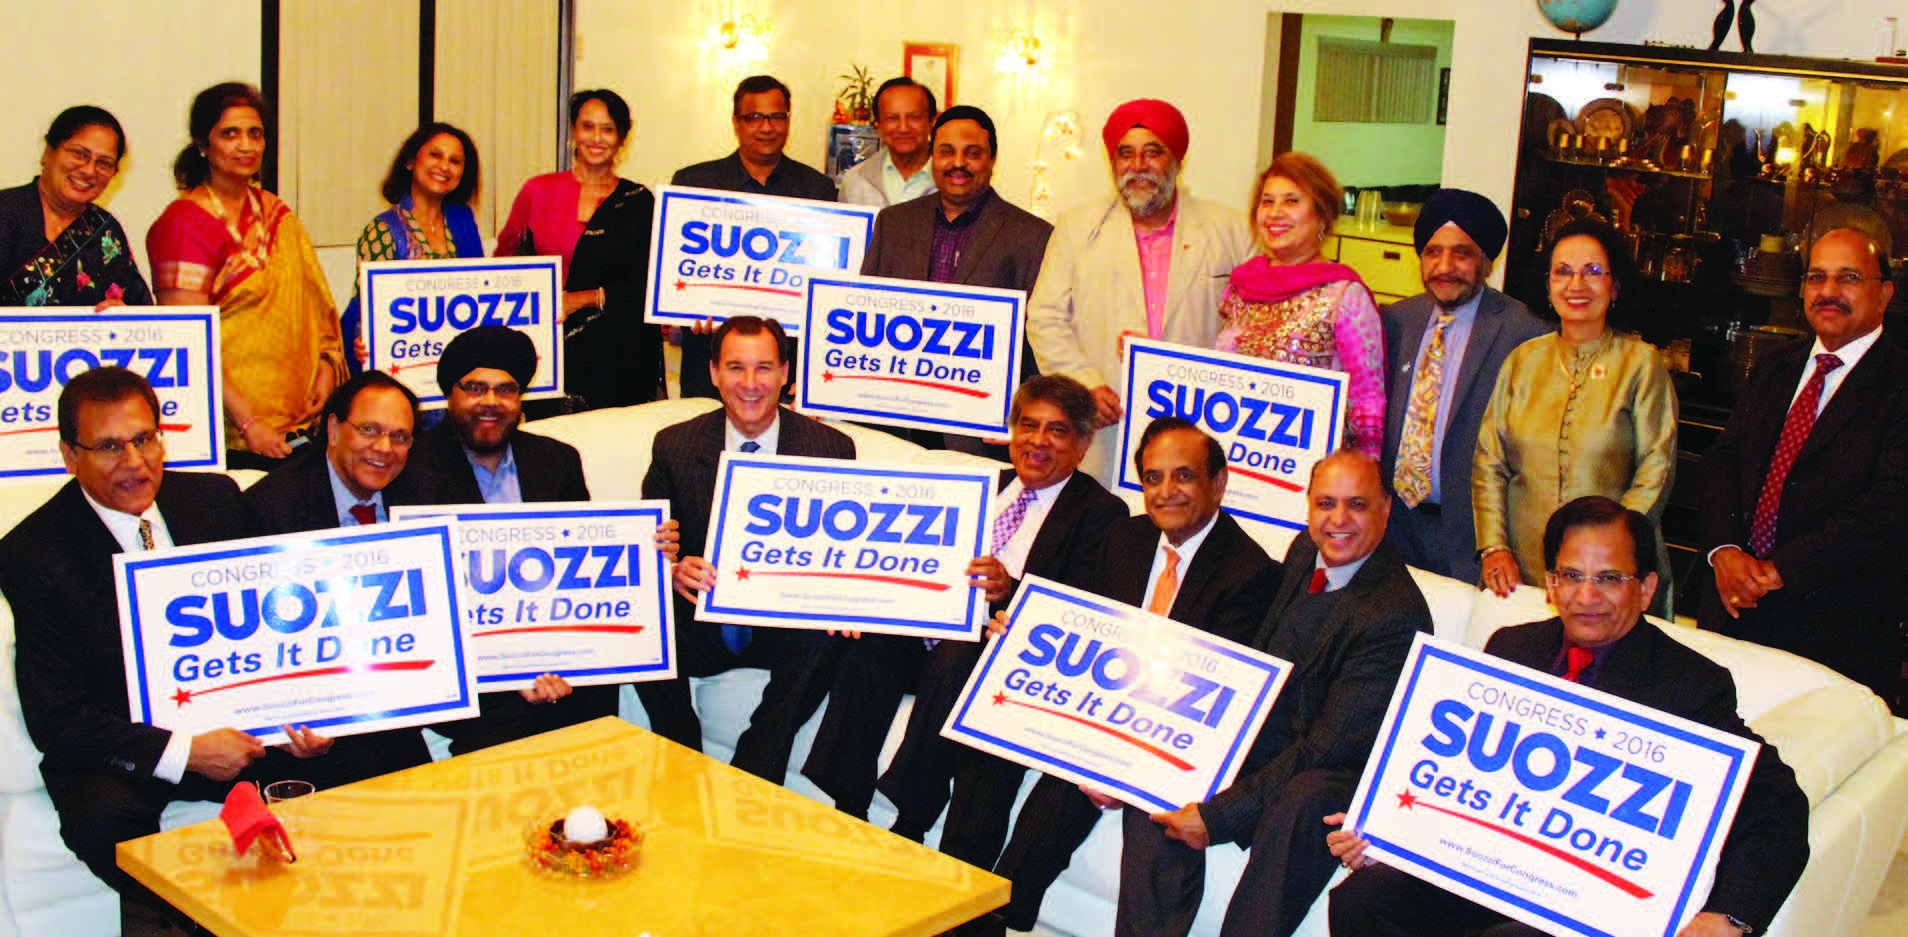 Indian American community leaders and heads of organizations at a fundraiser in support of Tom Suozzi for Congress, hosted by Ratna & Varinder Bhalla